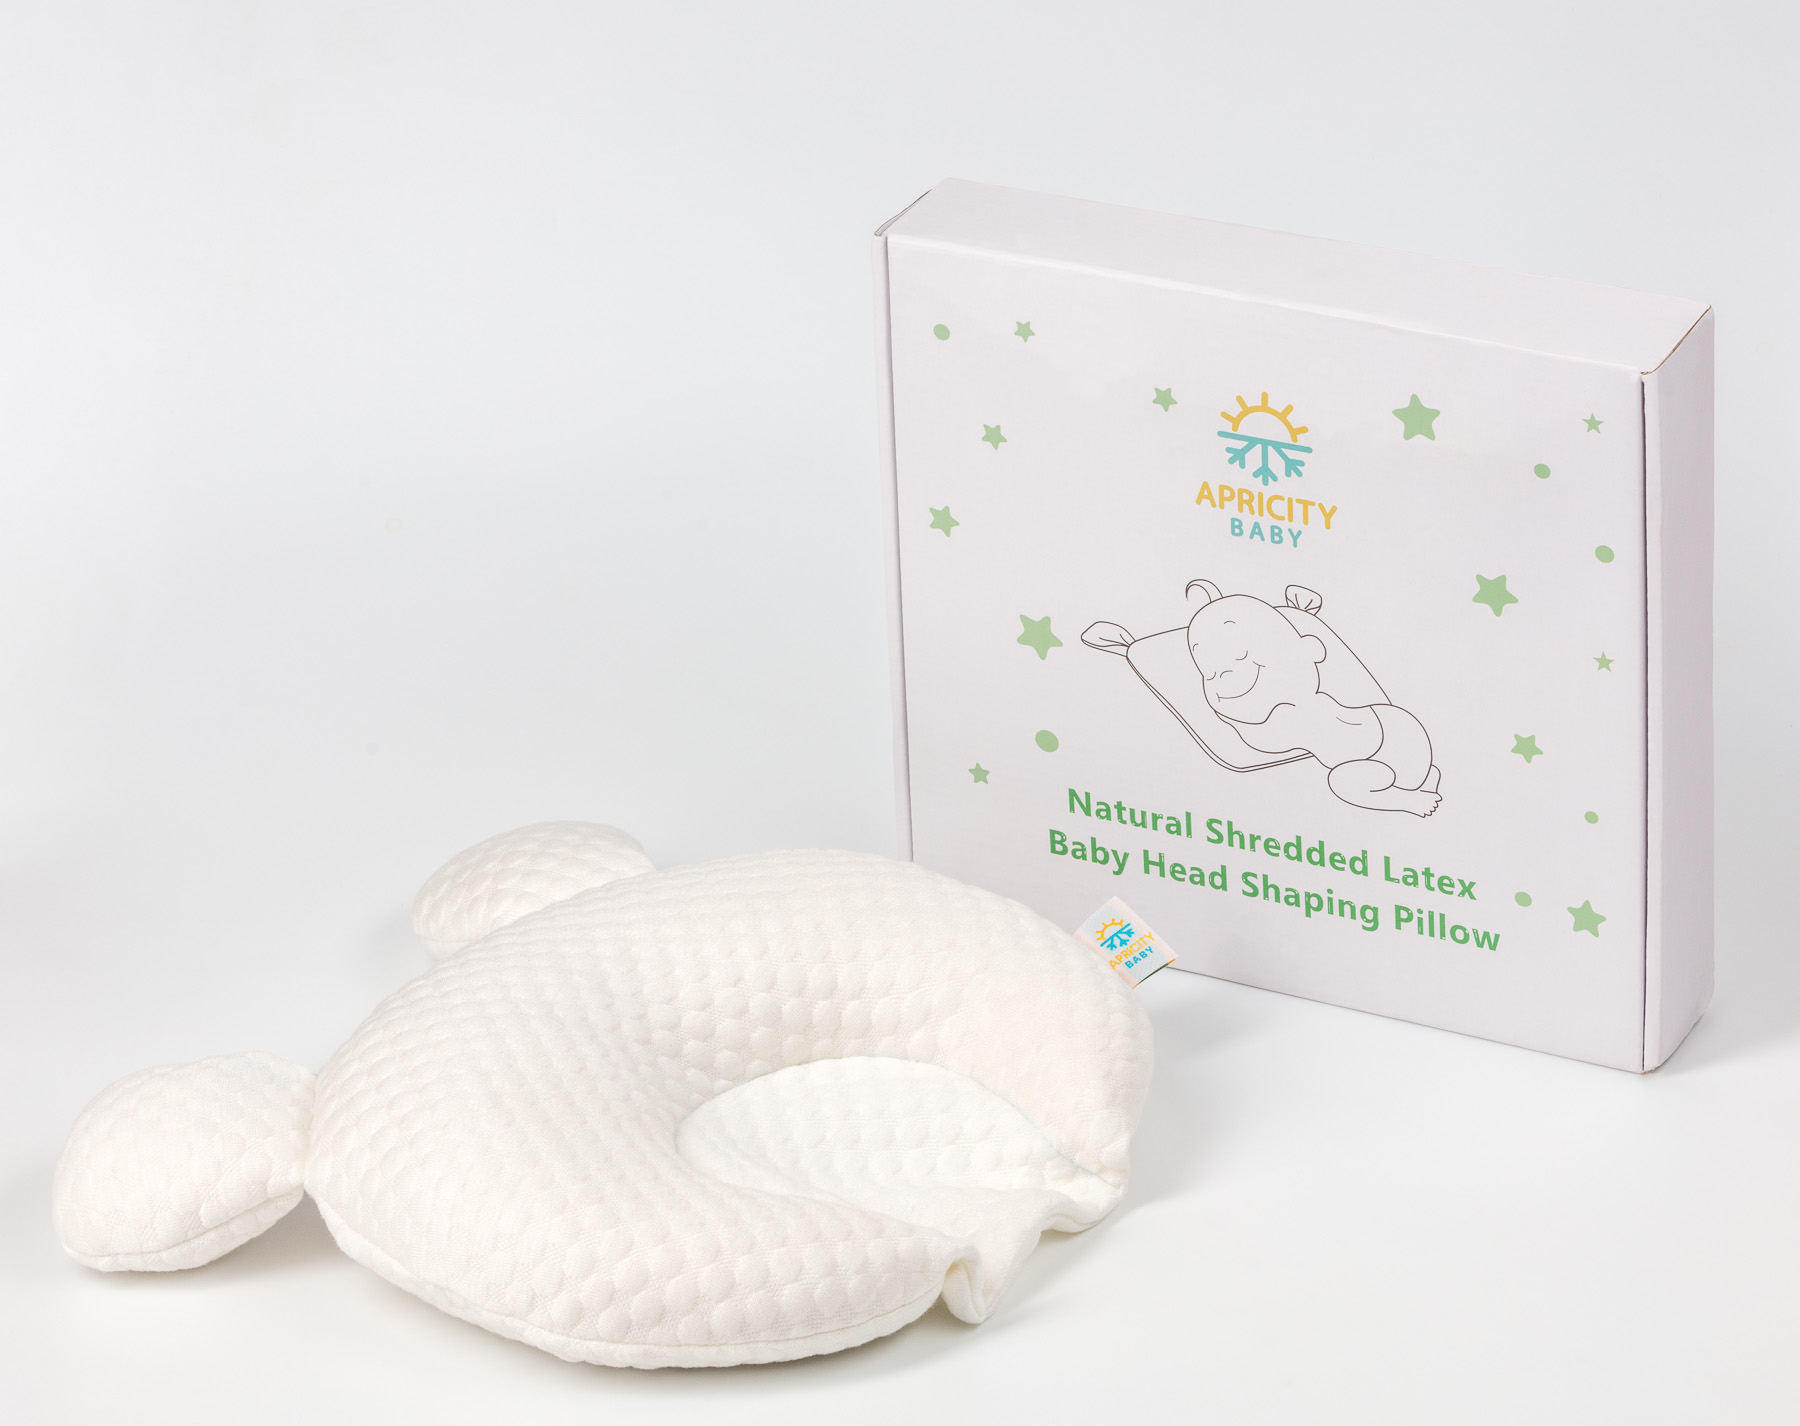 Baby Pillow with box_- Advertising product photography for Amazon